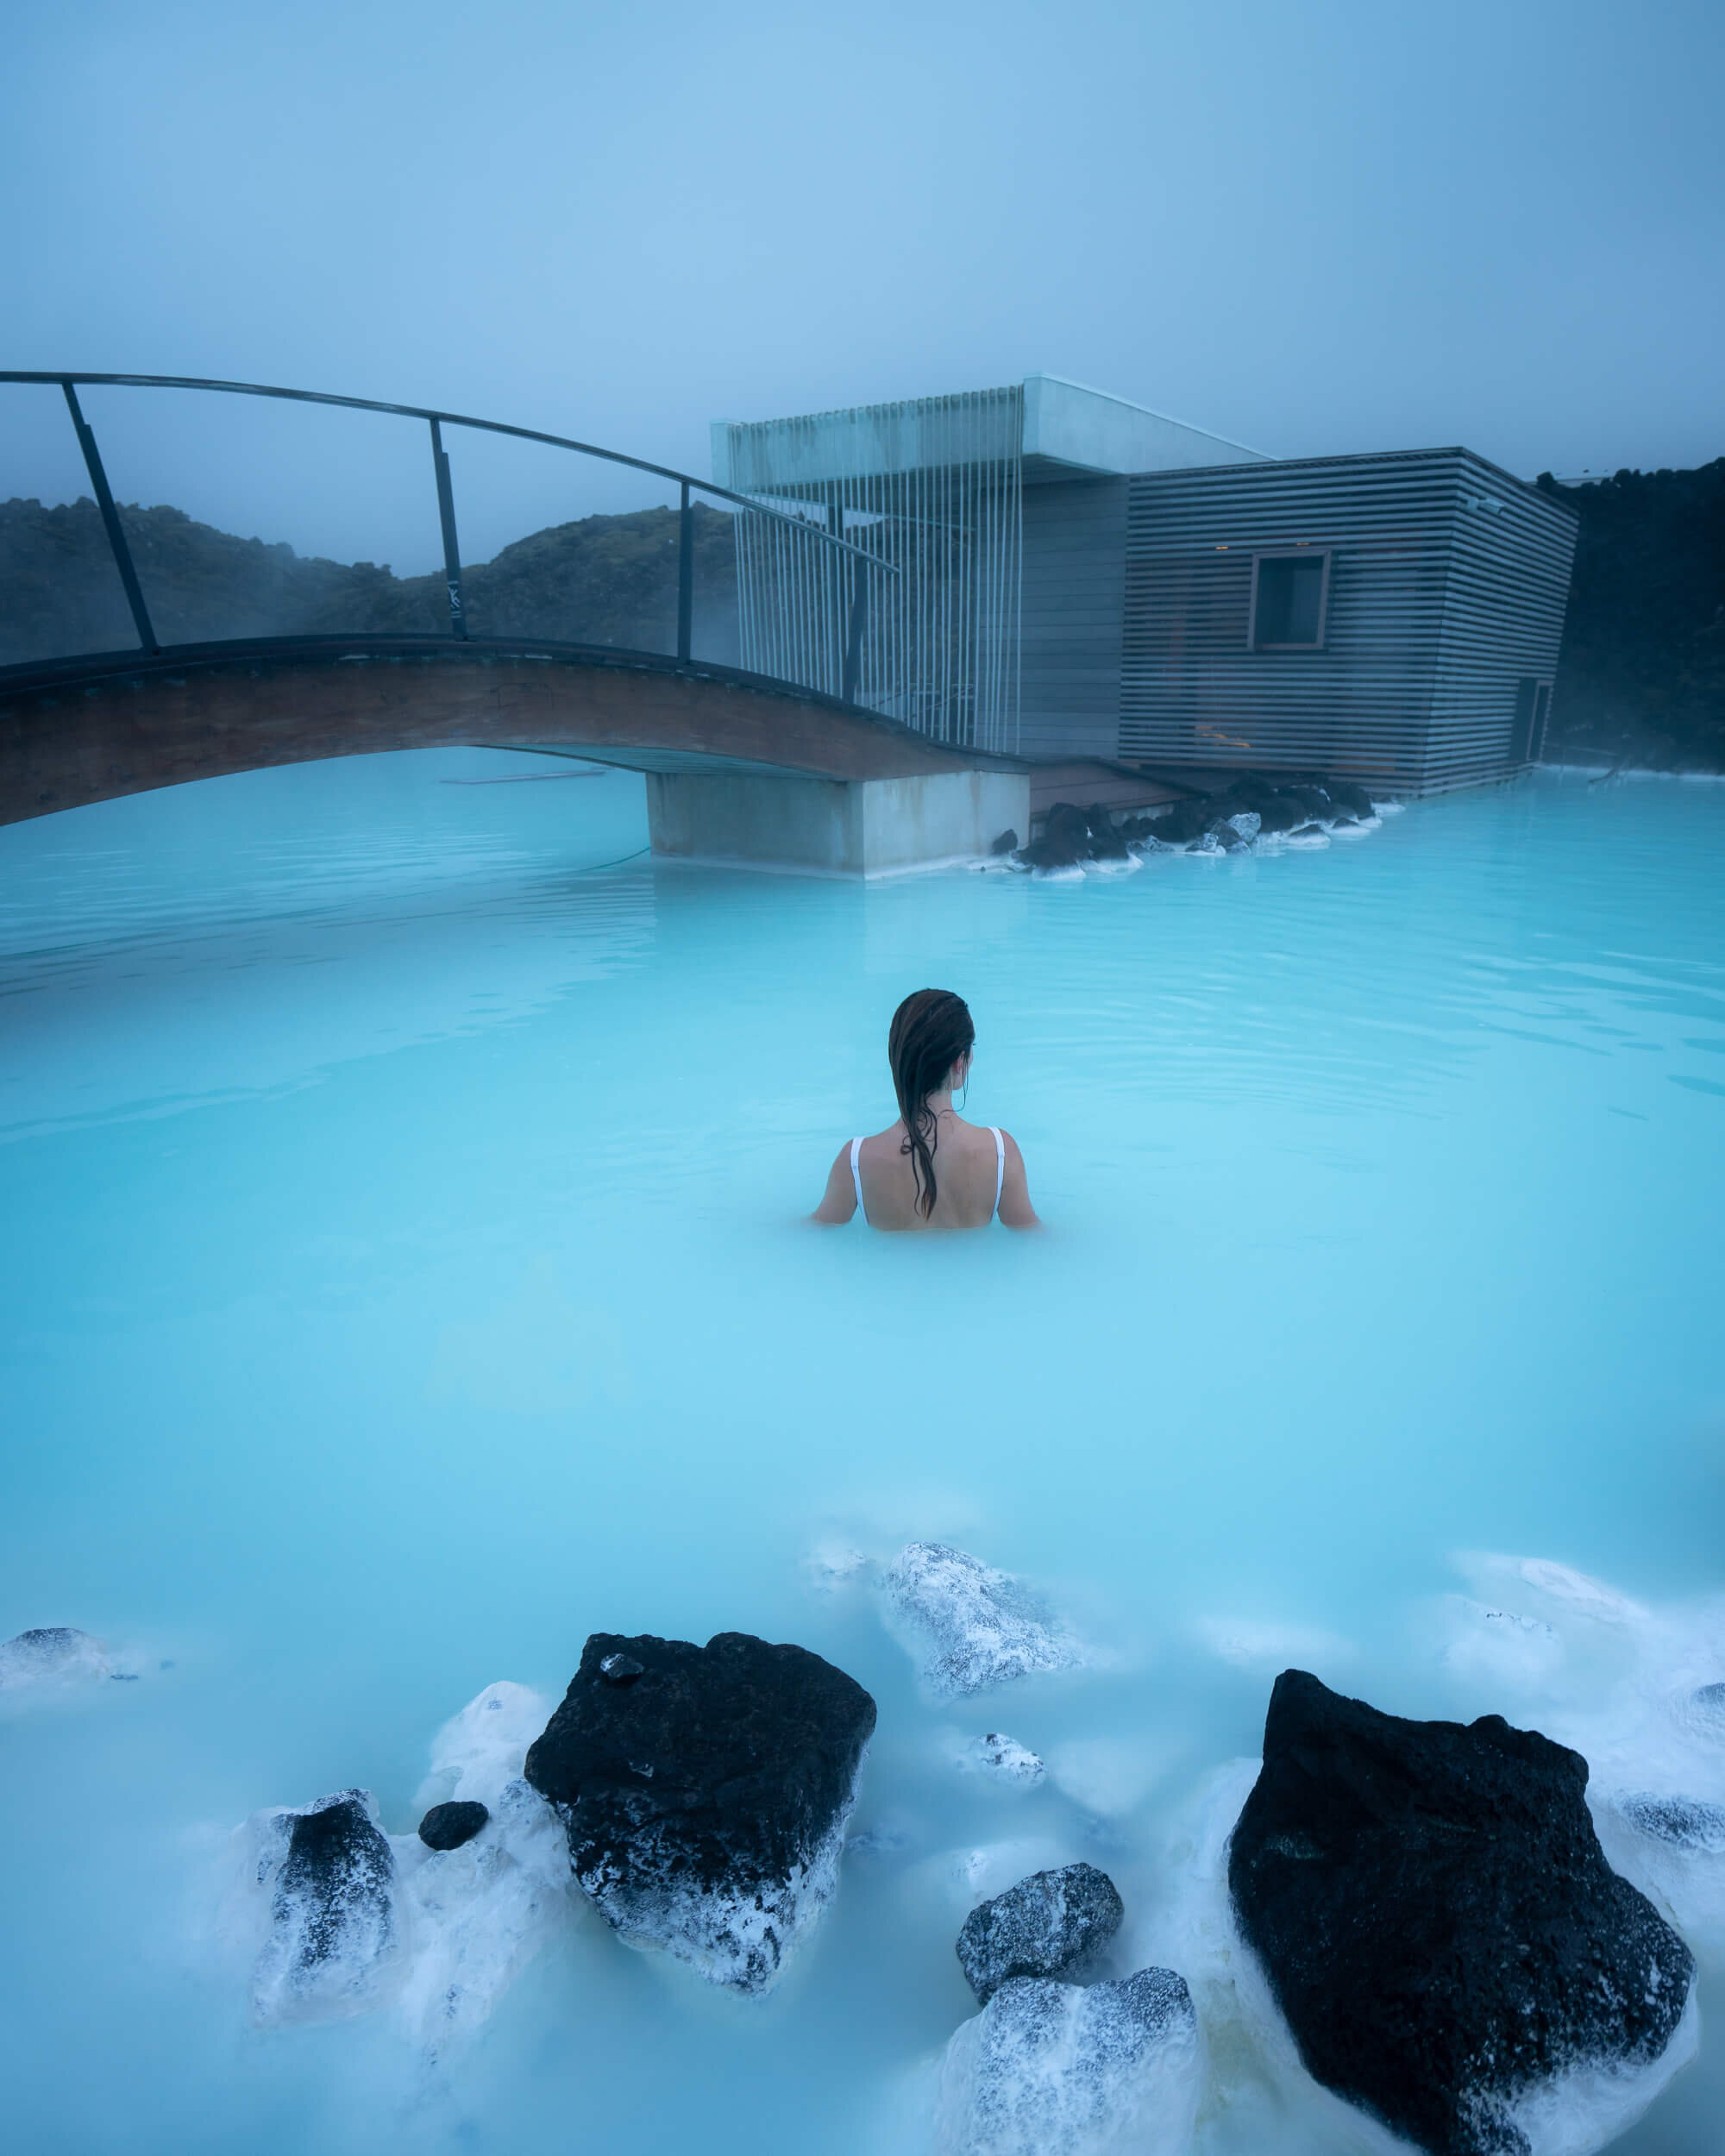 Relaxing at the Blue Lagoon Geothermal Spa before heading to the airport.